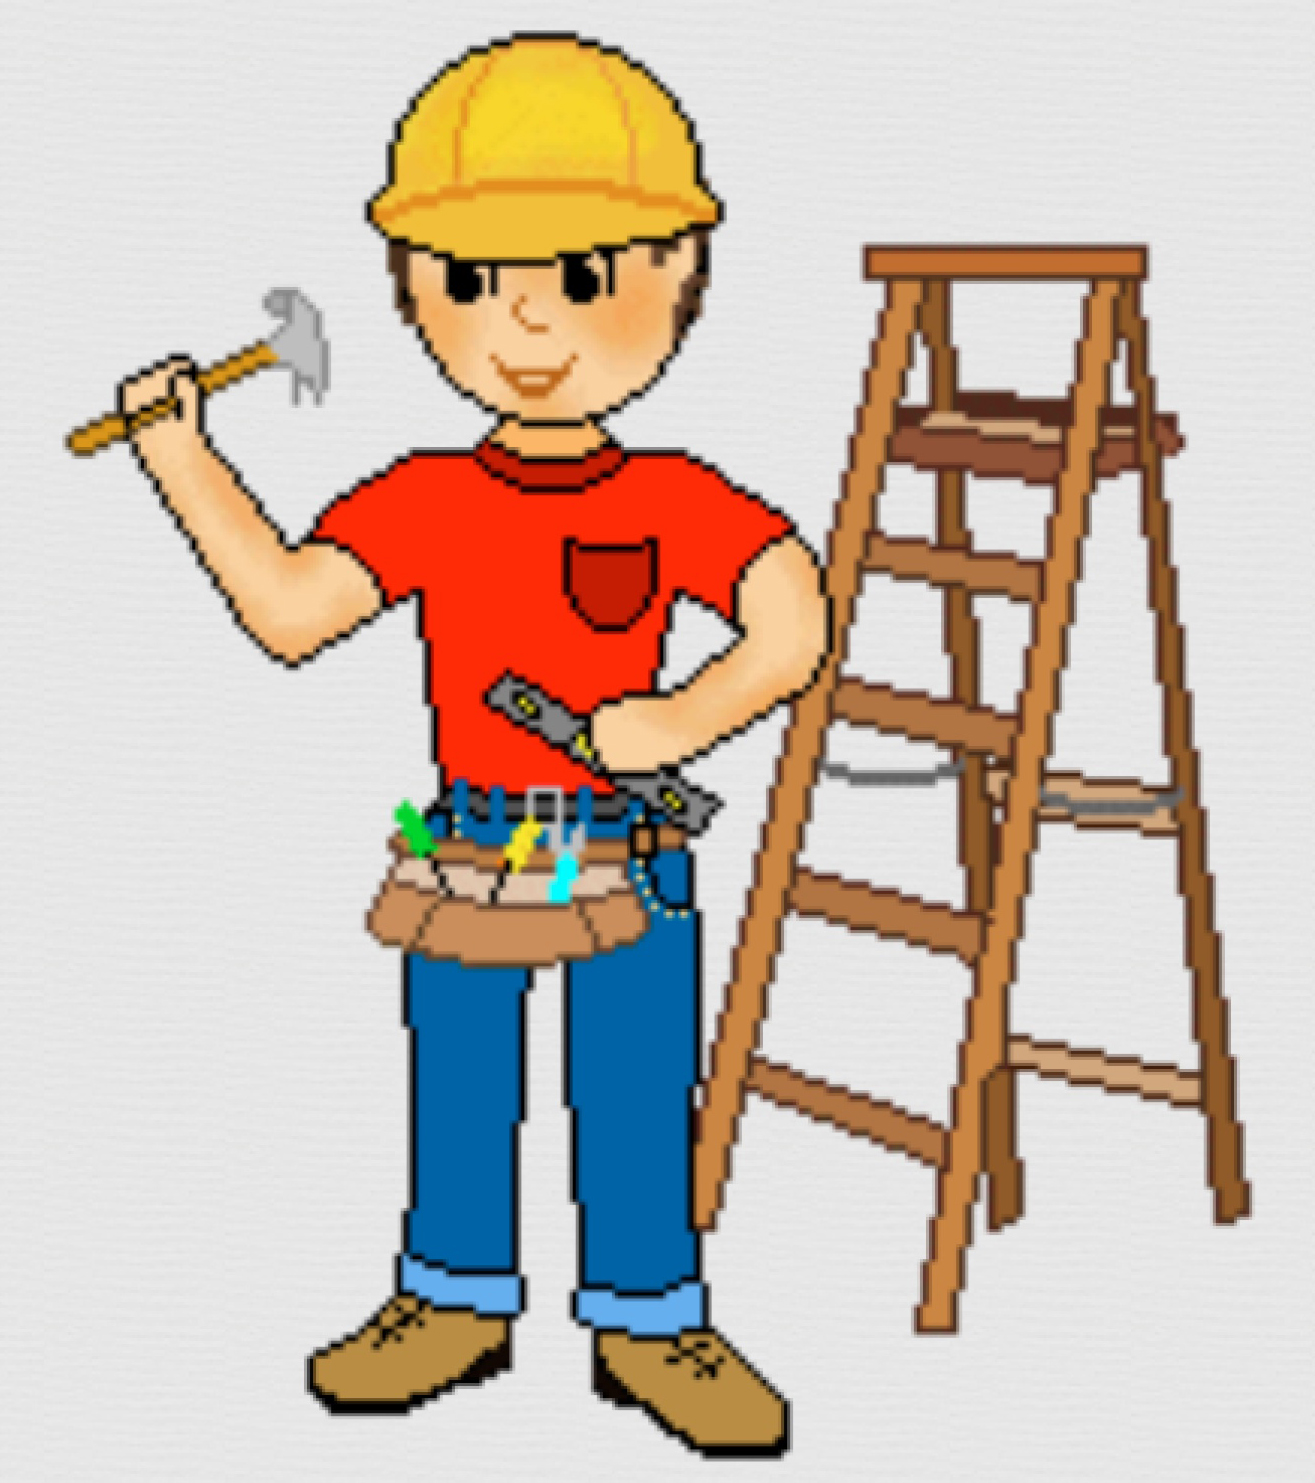 Construction Worker Clipart 